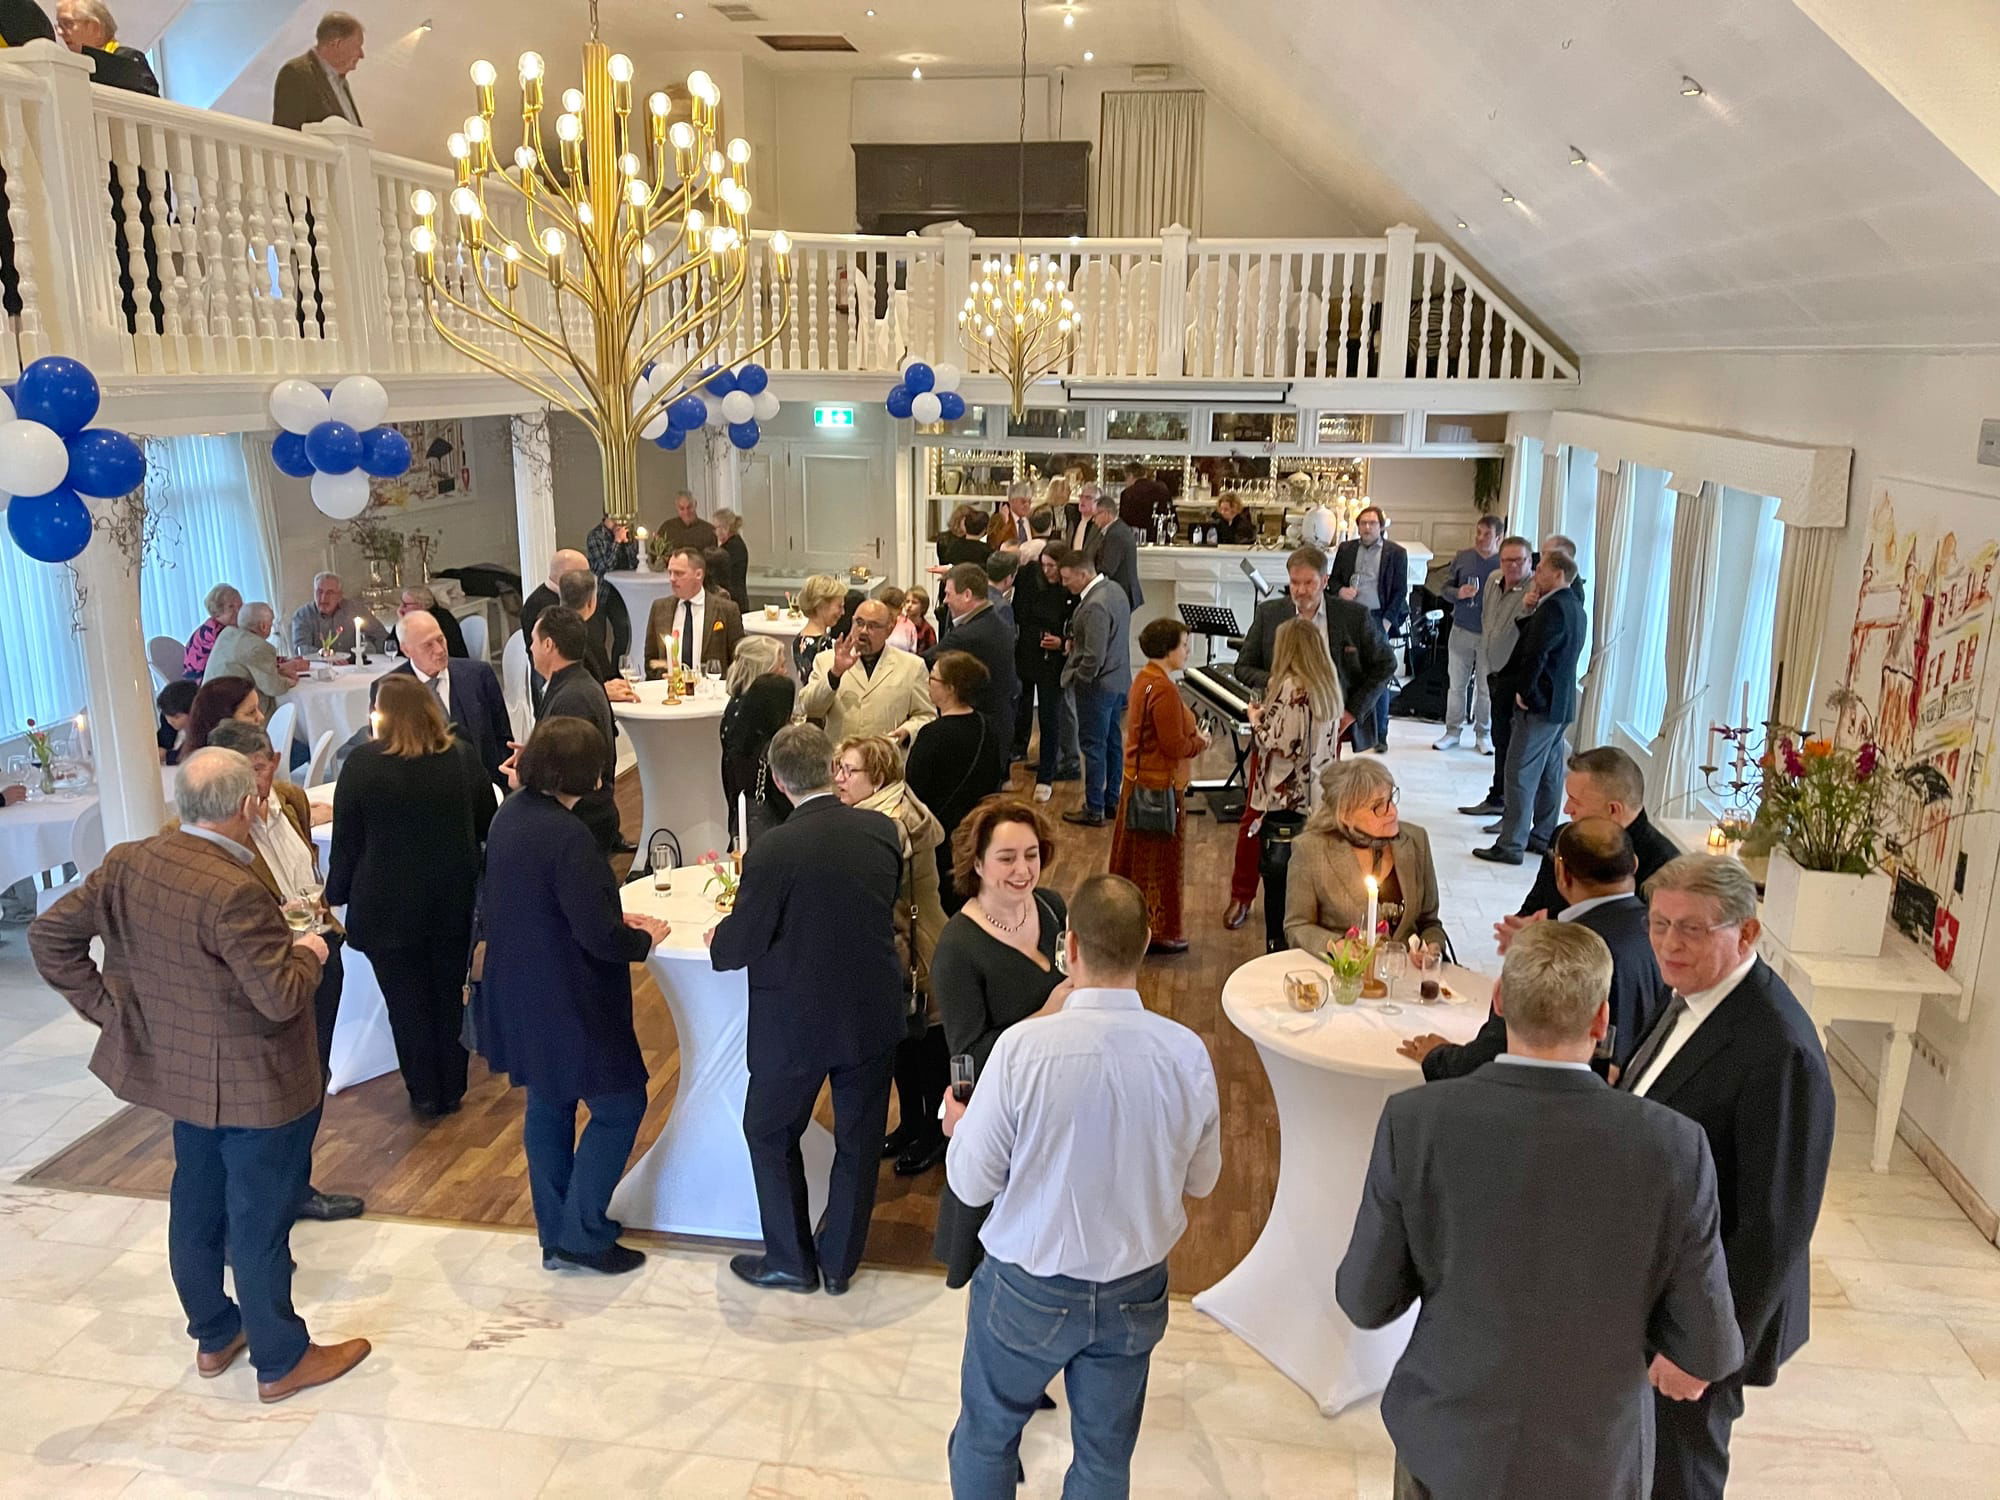 February 20th, 2022 New Years Reception at De Pastory